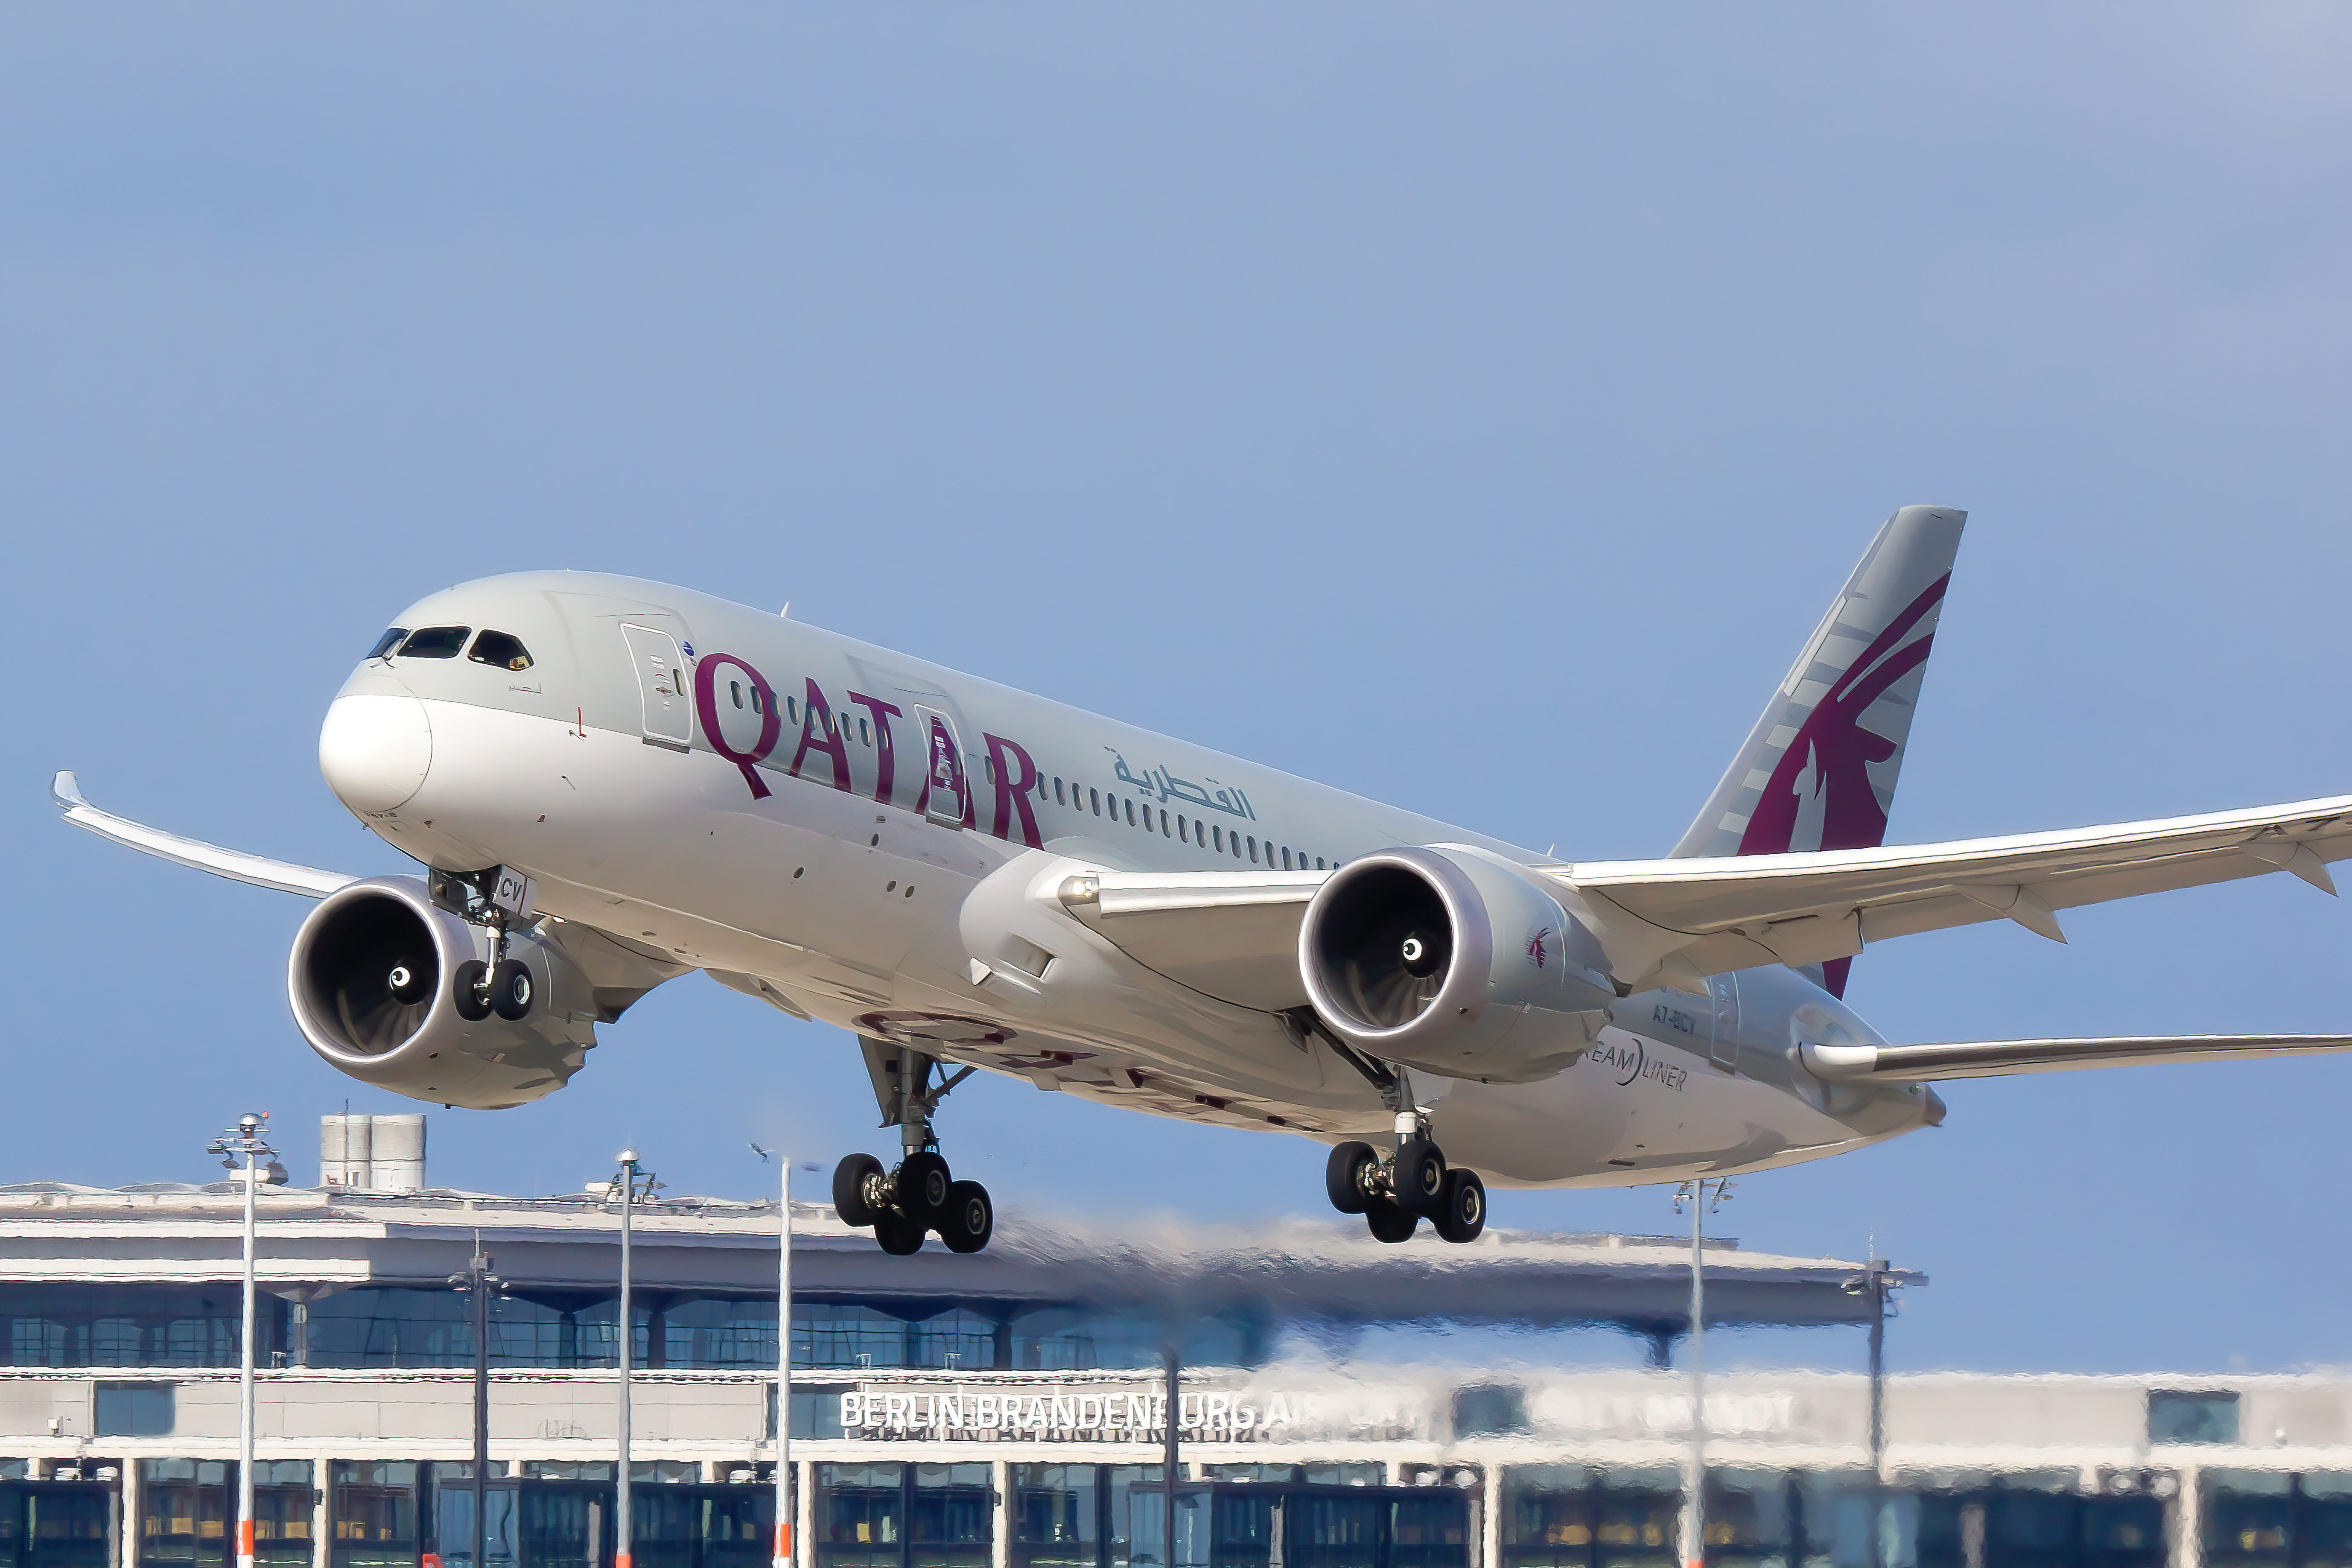 Storm Agnes: Qatar 787 Fights Off Strong Winds in Dublin